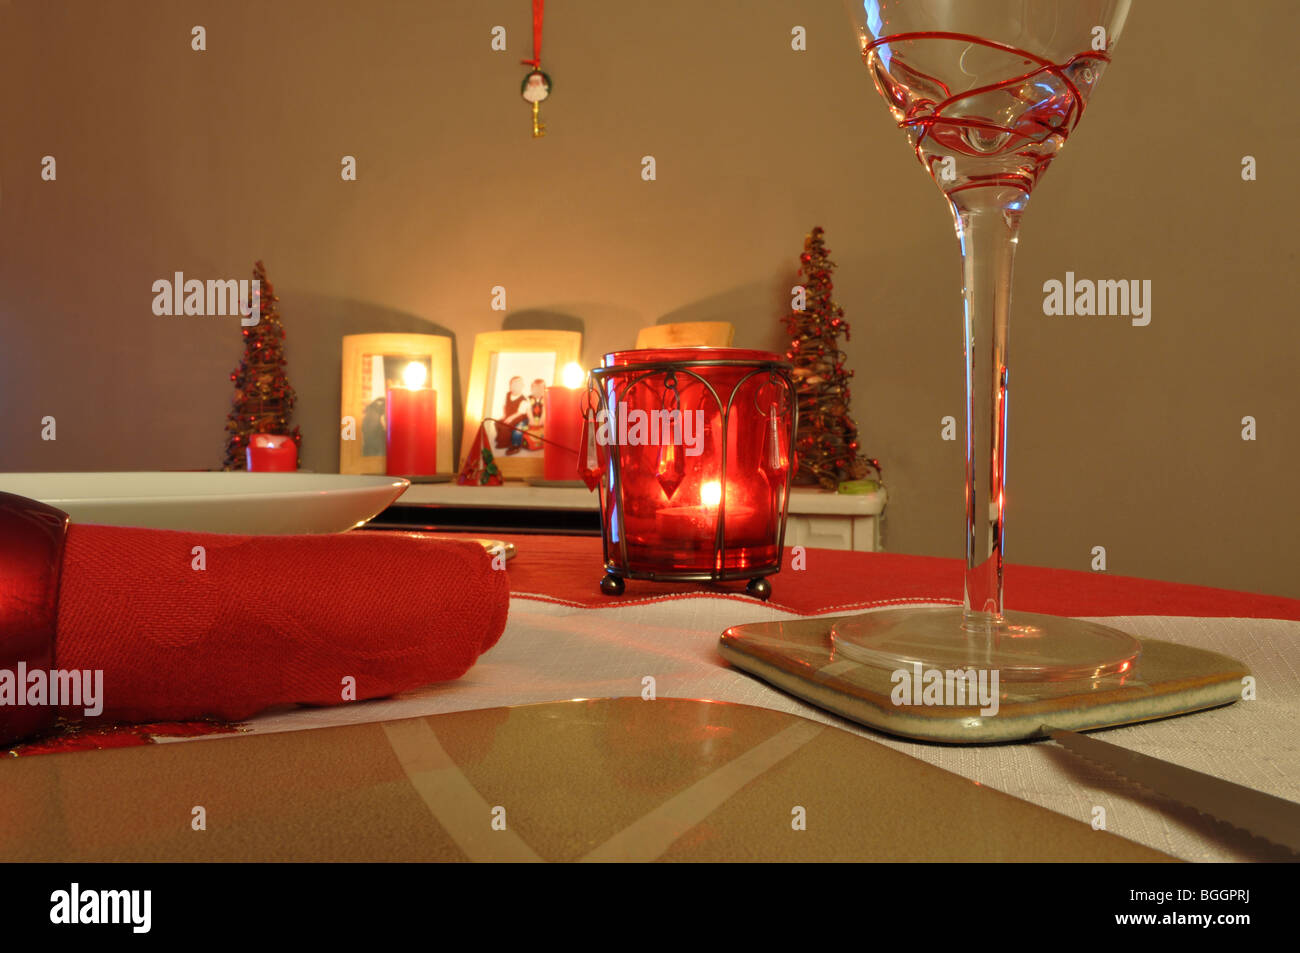 Christmas dinner table with red settings and napkins and wine glass Stock Photo